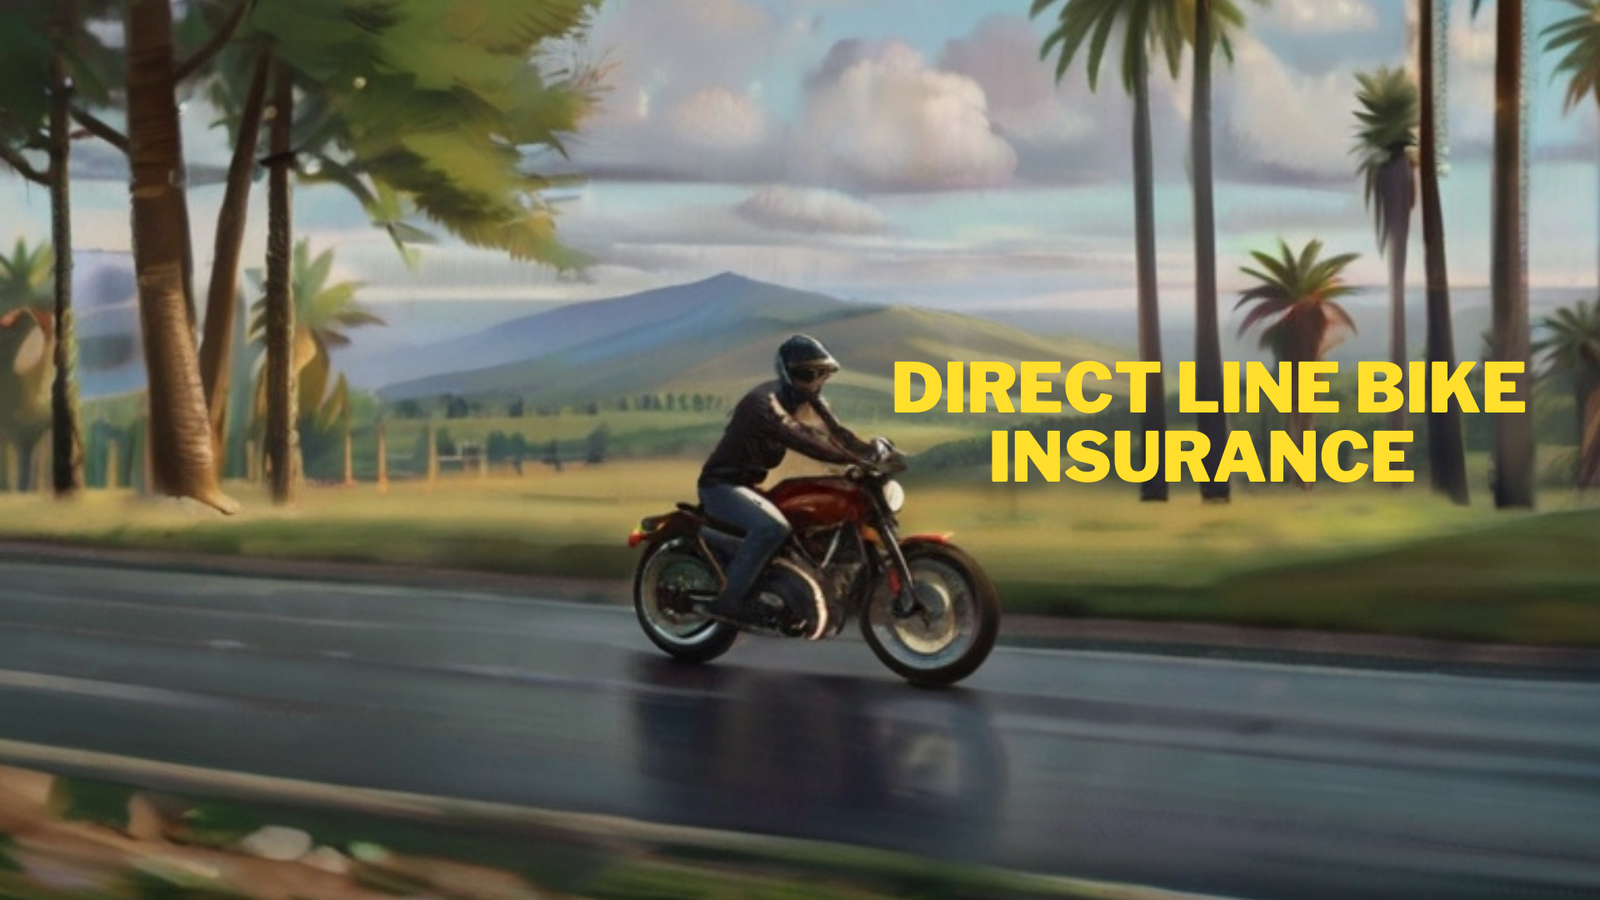 How to Obtain Direct Line Bike Insurance